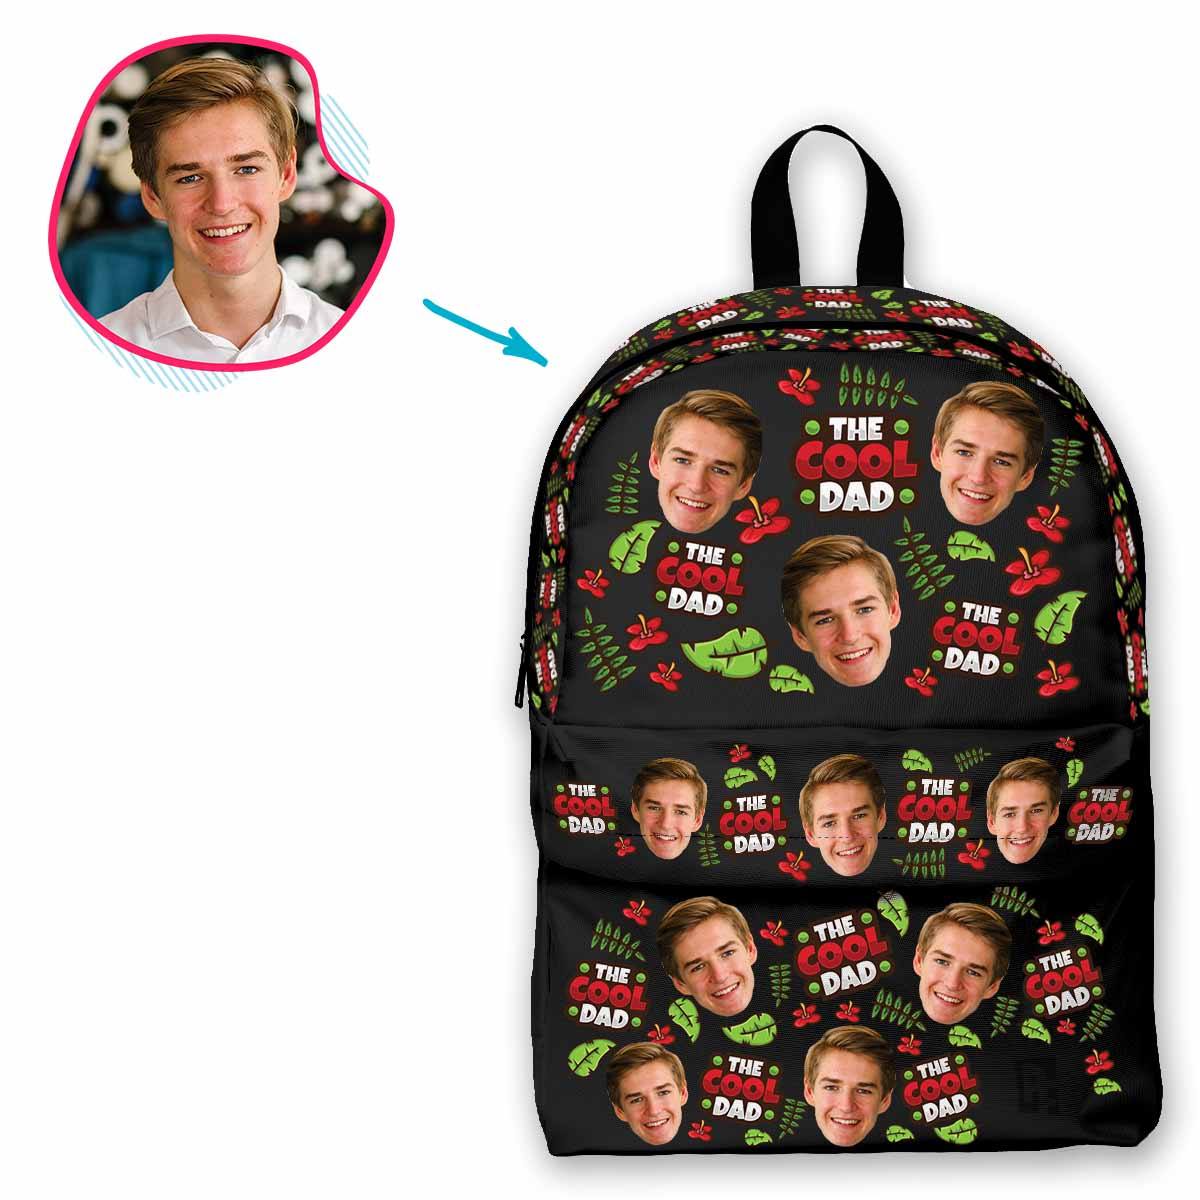 dark The Cool Dad classic backpack personalized with photo of face printed on it